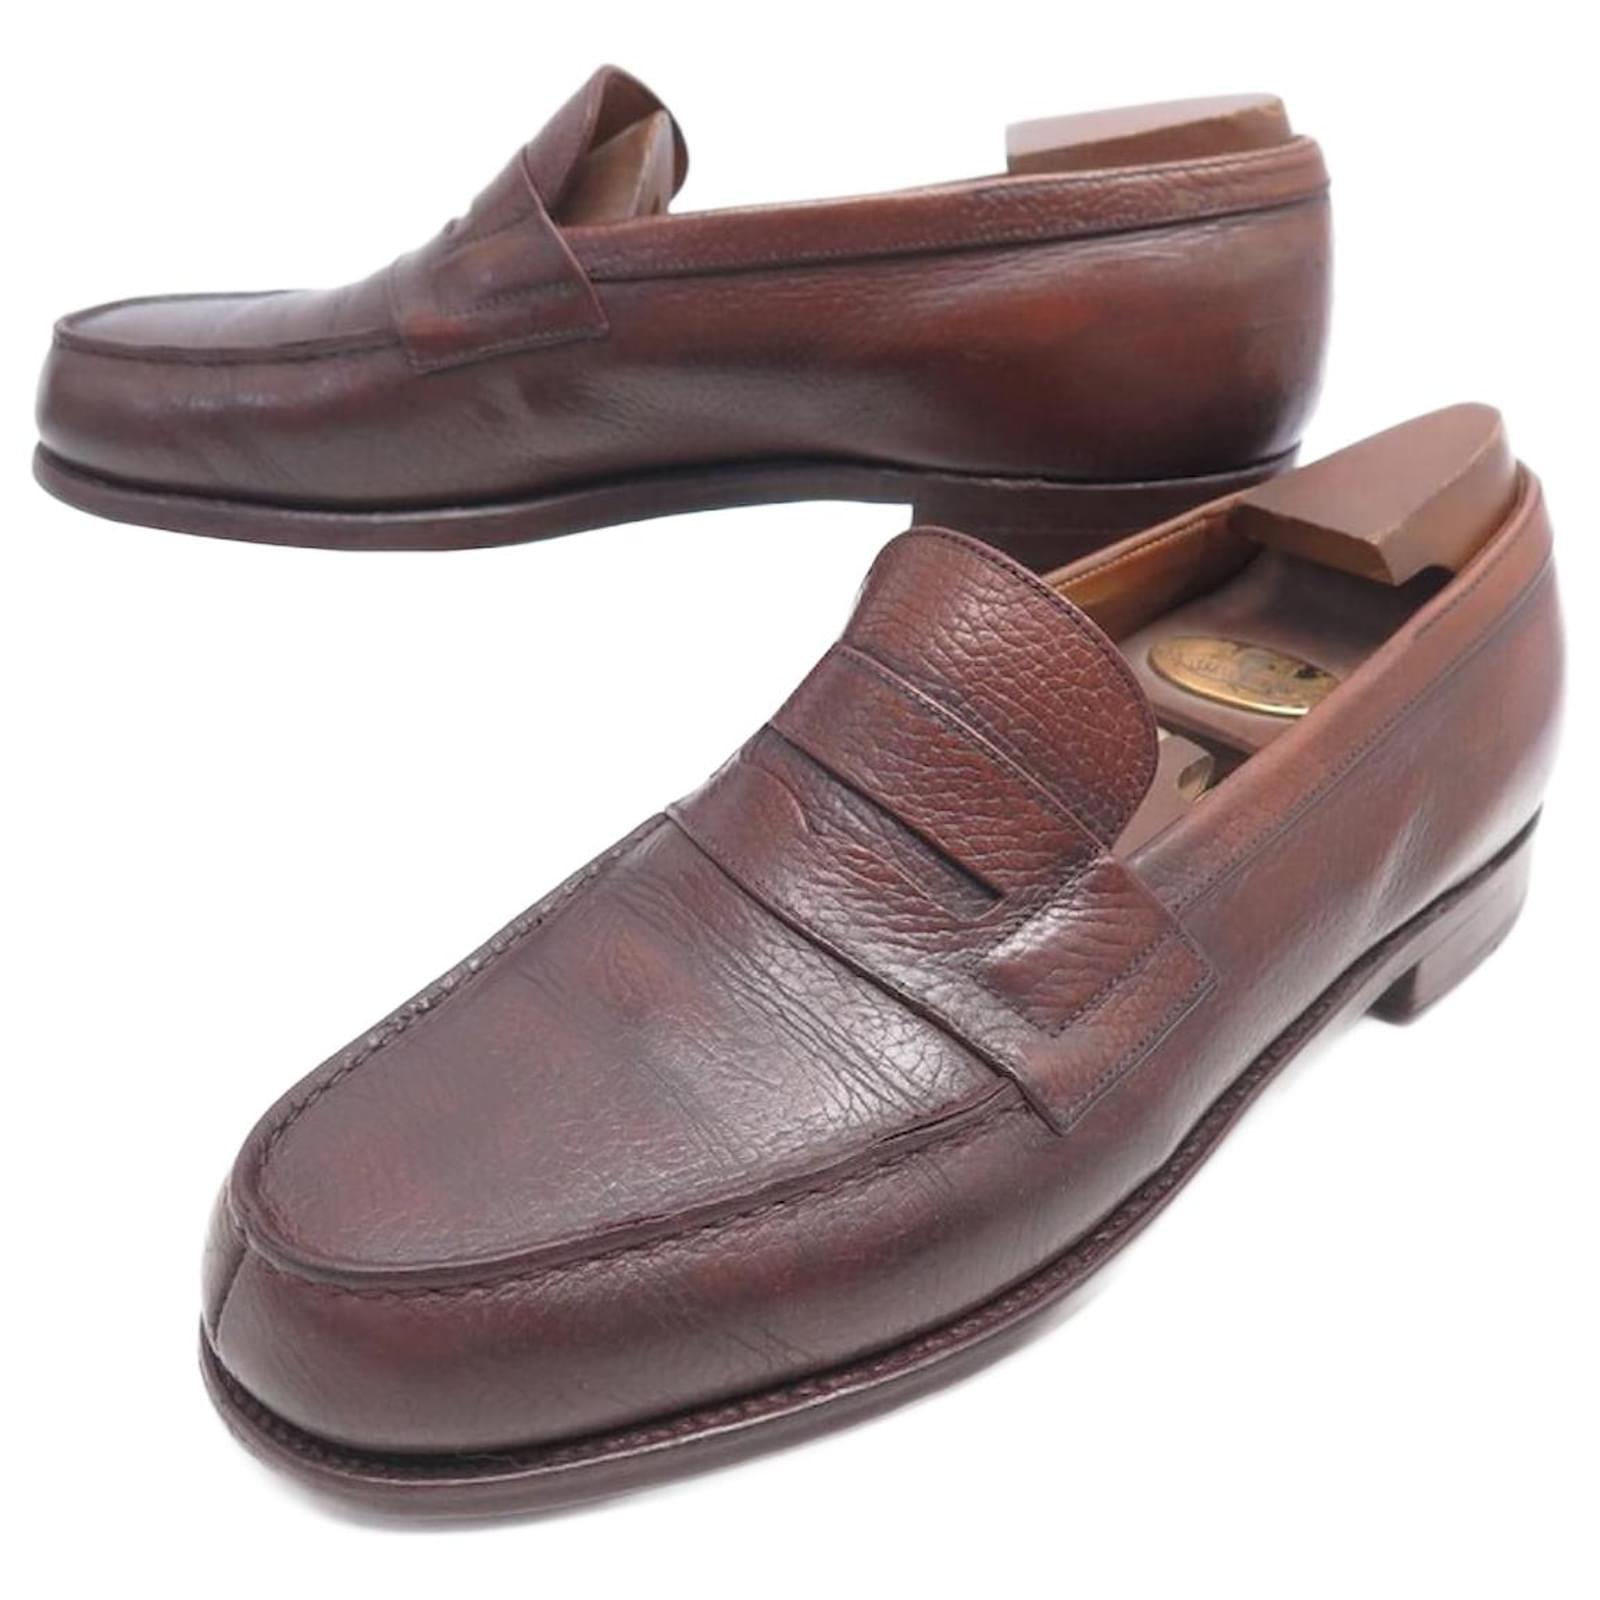 JM WESTON SHOES 180 Church´s Loafers 6.5b 40.5 FINE BROWN LEATHER